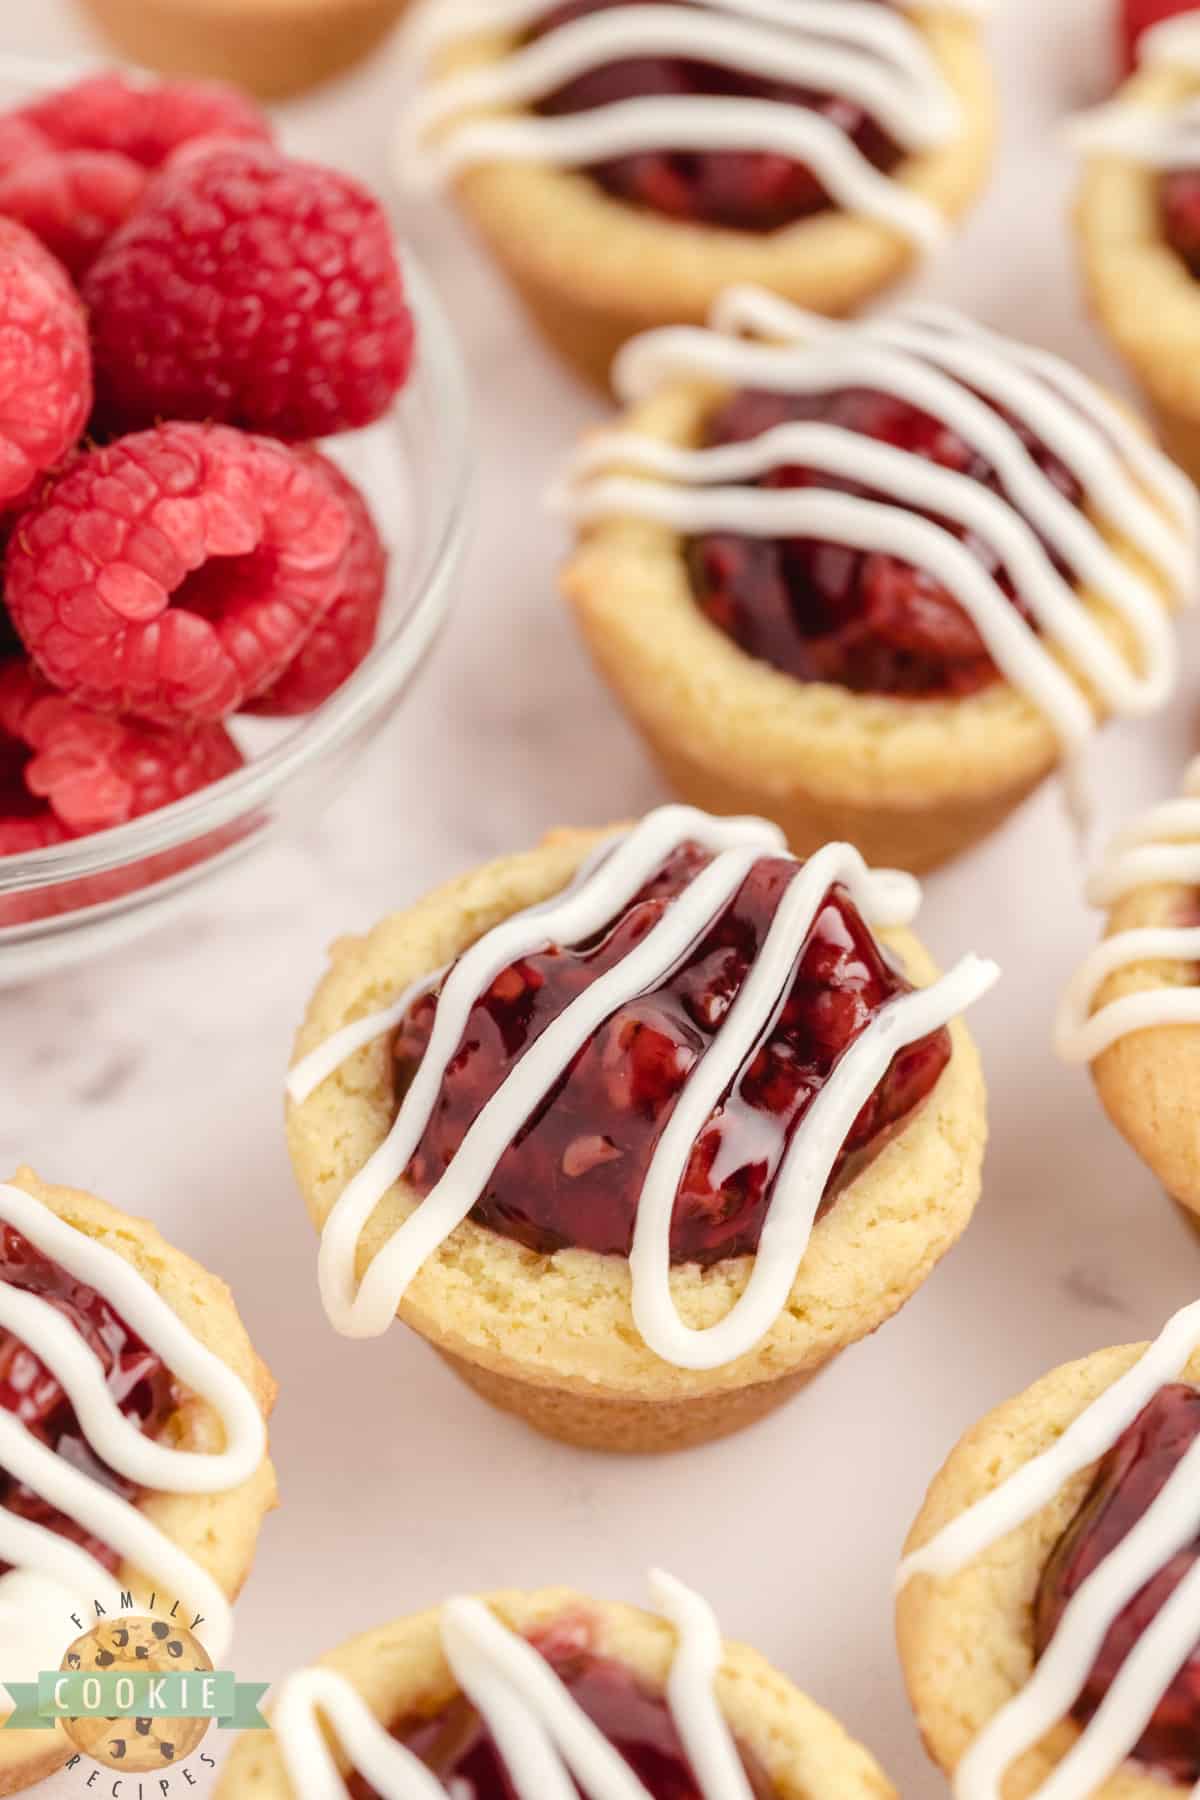 Lemon cookie cup with raspberry pie filling and white chocolate drizzle